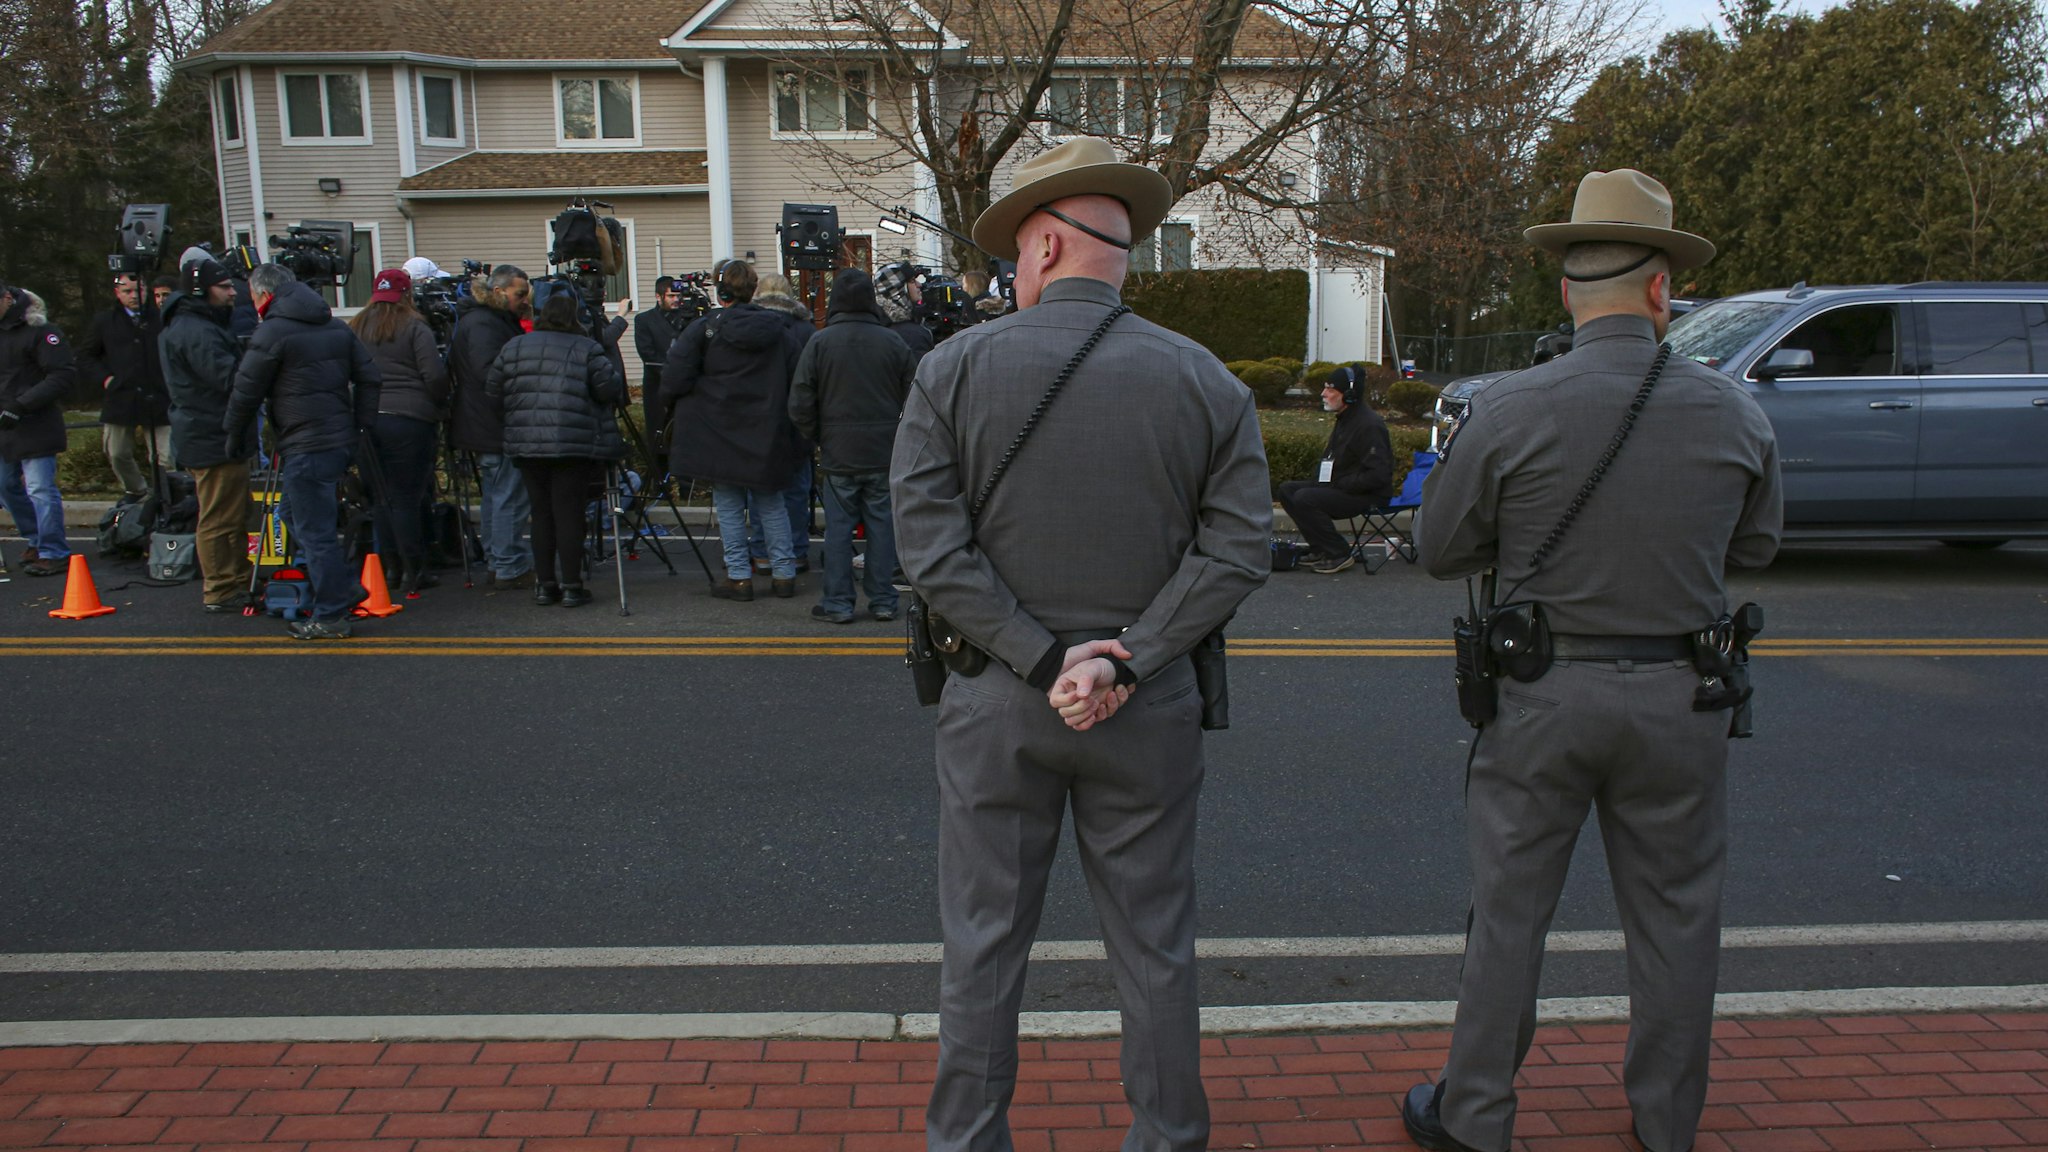 Two police officers stand guard as the press gathers outside a rabbi's home where a machete attack that took place earlier during the Jewish festival of Hanukkah, in Monsey, New York, on December 29, 2019. - An intruder stabbed and wounded five people at a rabbi's house in New York during a gathering to celebrate the Jewish festival of Hanukkah late on December 28, 2019, officials and media reports said. Local police departments, speaking to AFP, declined to give the number of people injured, but a suspect has been taken into custody and a vehicle safeguarded, an NYPD spokesman said. (Photo by Kena Betancur / AFP) (Photo by KENA BETANCUR/AFP via Getty Images)